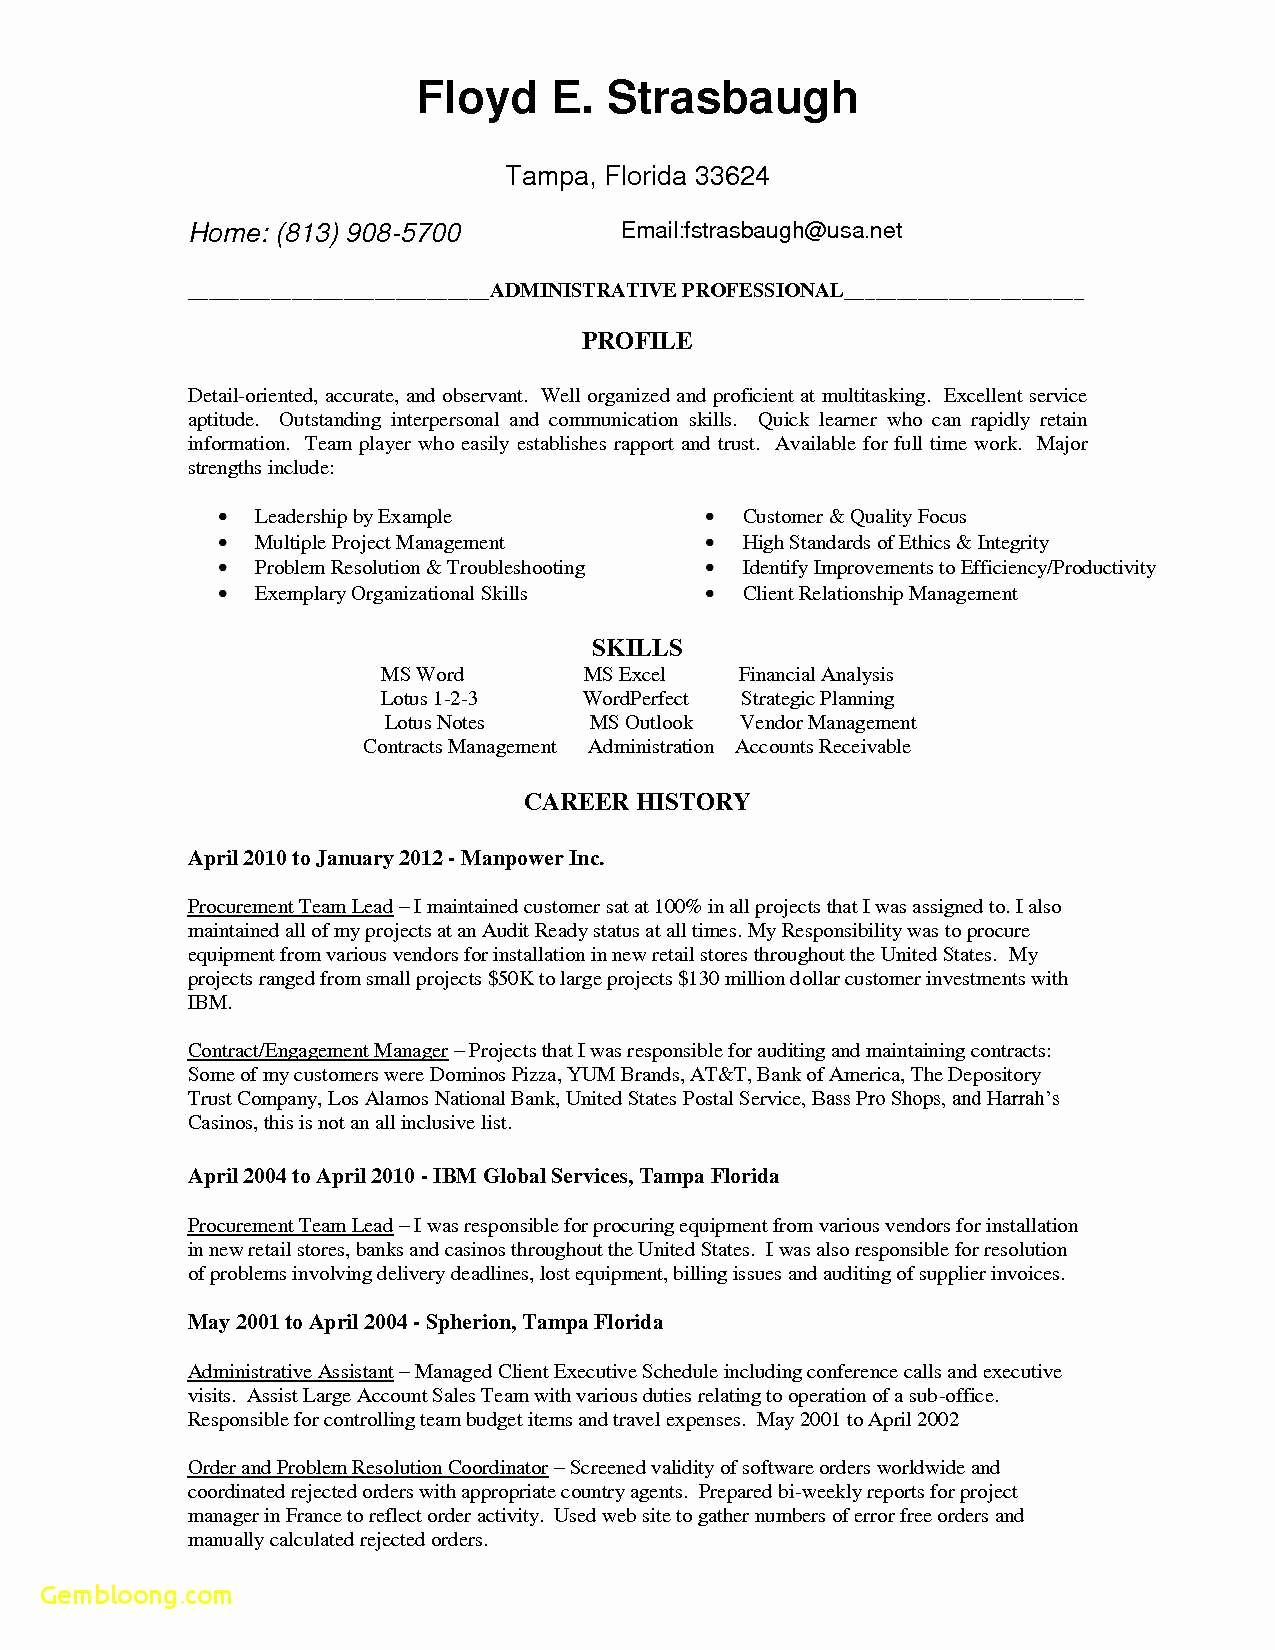 engineering cover letter template example-Cover Letter Engineer Awesome Science Resume Awesome Resume Cover Letter formatted Resume 0d 2-q